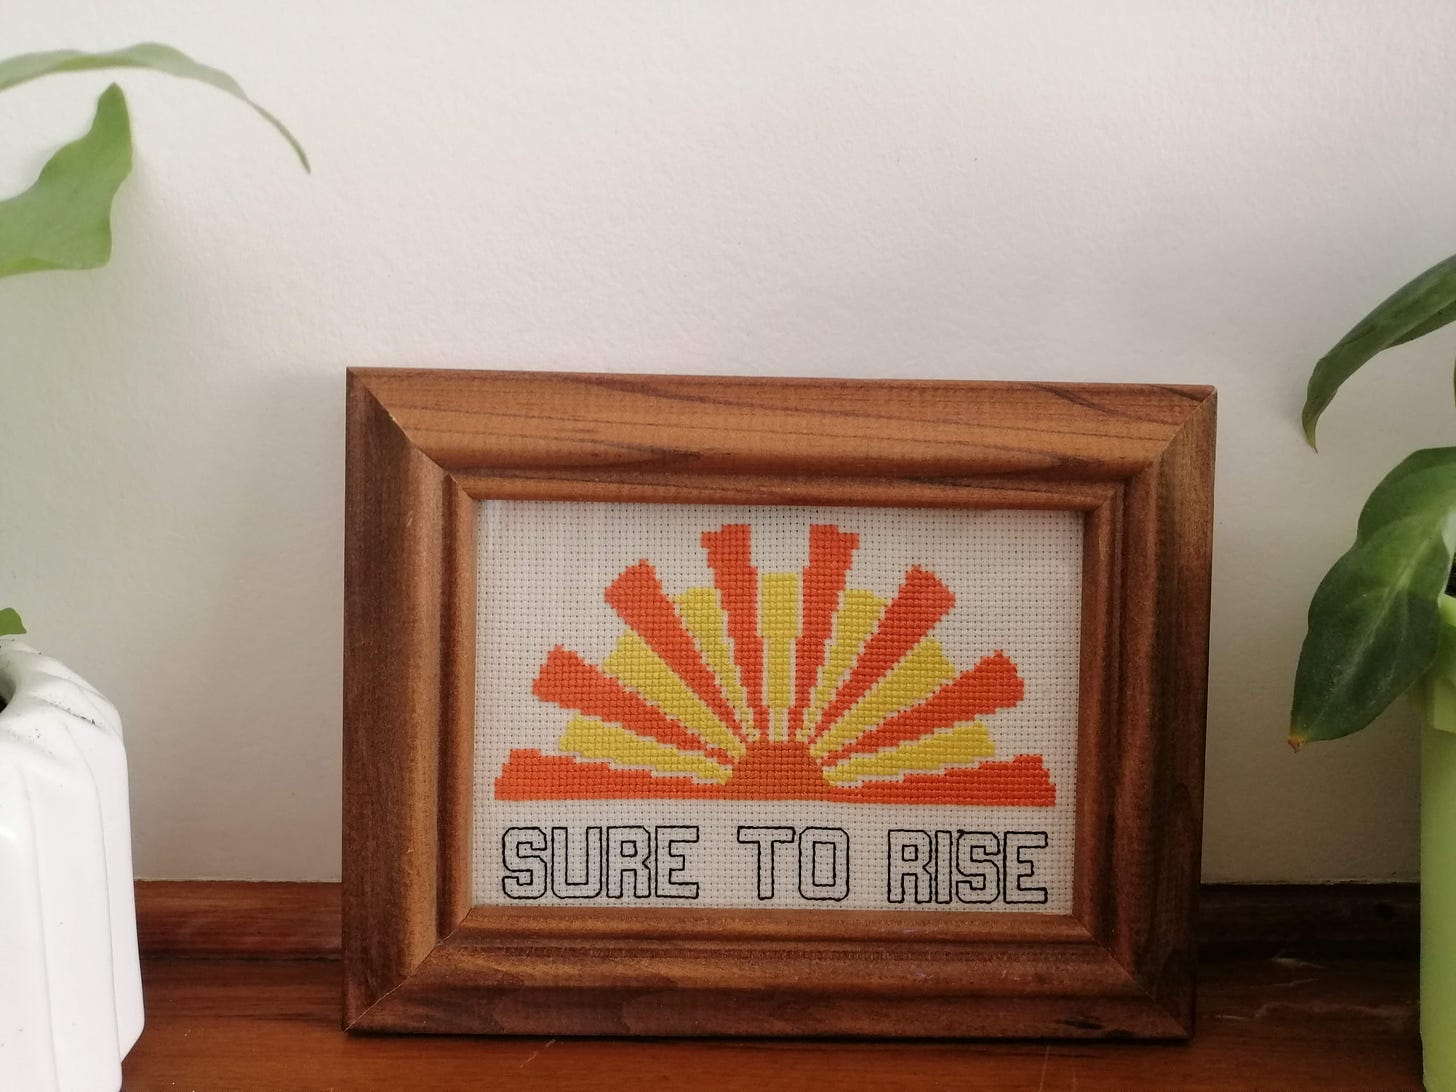 Completed cross stitch in a brown wooden frame. The stitch is the Edmonds rising sun logo with the text "Sure to rise" like the top of the factory.